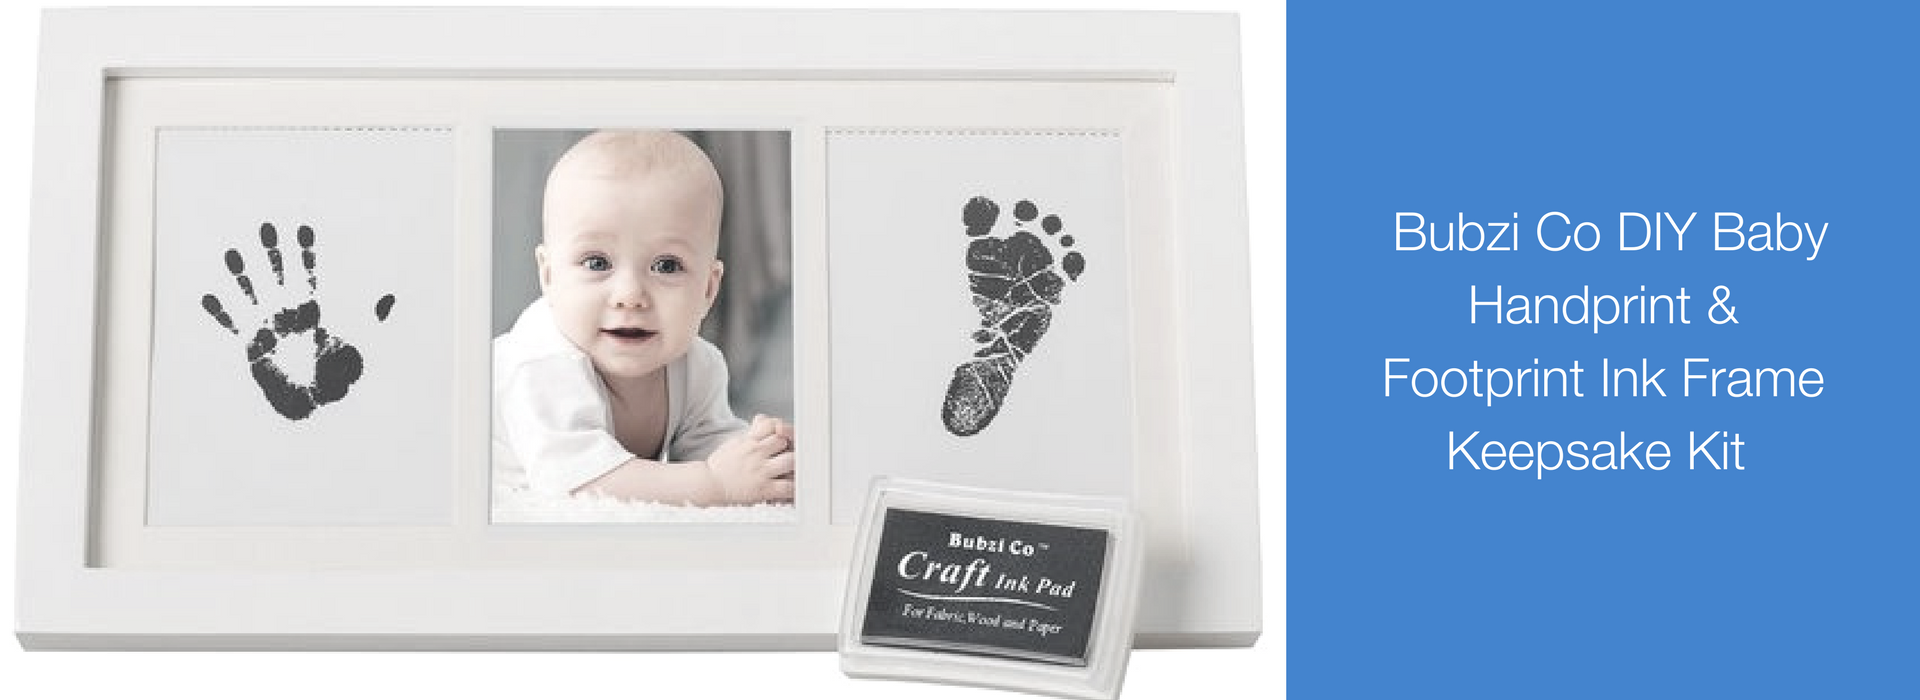 There’s so many ways you can use your baby’s hand and foot prints to create fun & lasting keepsake gifts for friends and family. Whether you create a baby shower invitation or a DIY Christmas ornament, it’s the perfect way to remember your newborn before their little hands & feet grow too big. If you’d rather buy a kit to save you time & money consider a DIY kit like Bubzi Co.'s Baby Handprint and Footprint Ink Frame Keepsake Kit. #BabyShowerGifts #NewBornPortraits #BabyCrafts #BabyArtPrint 